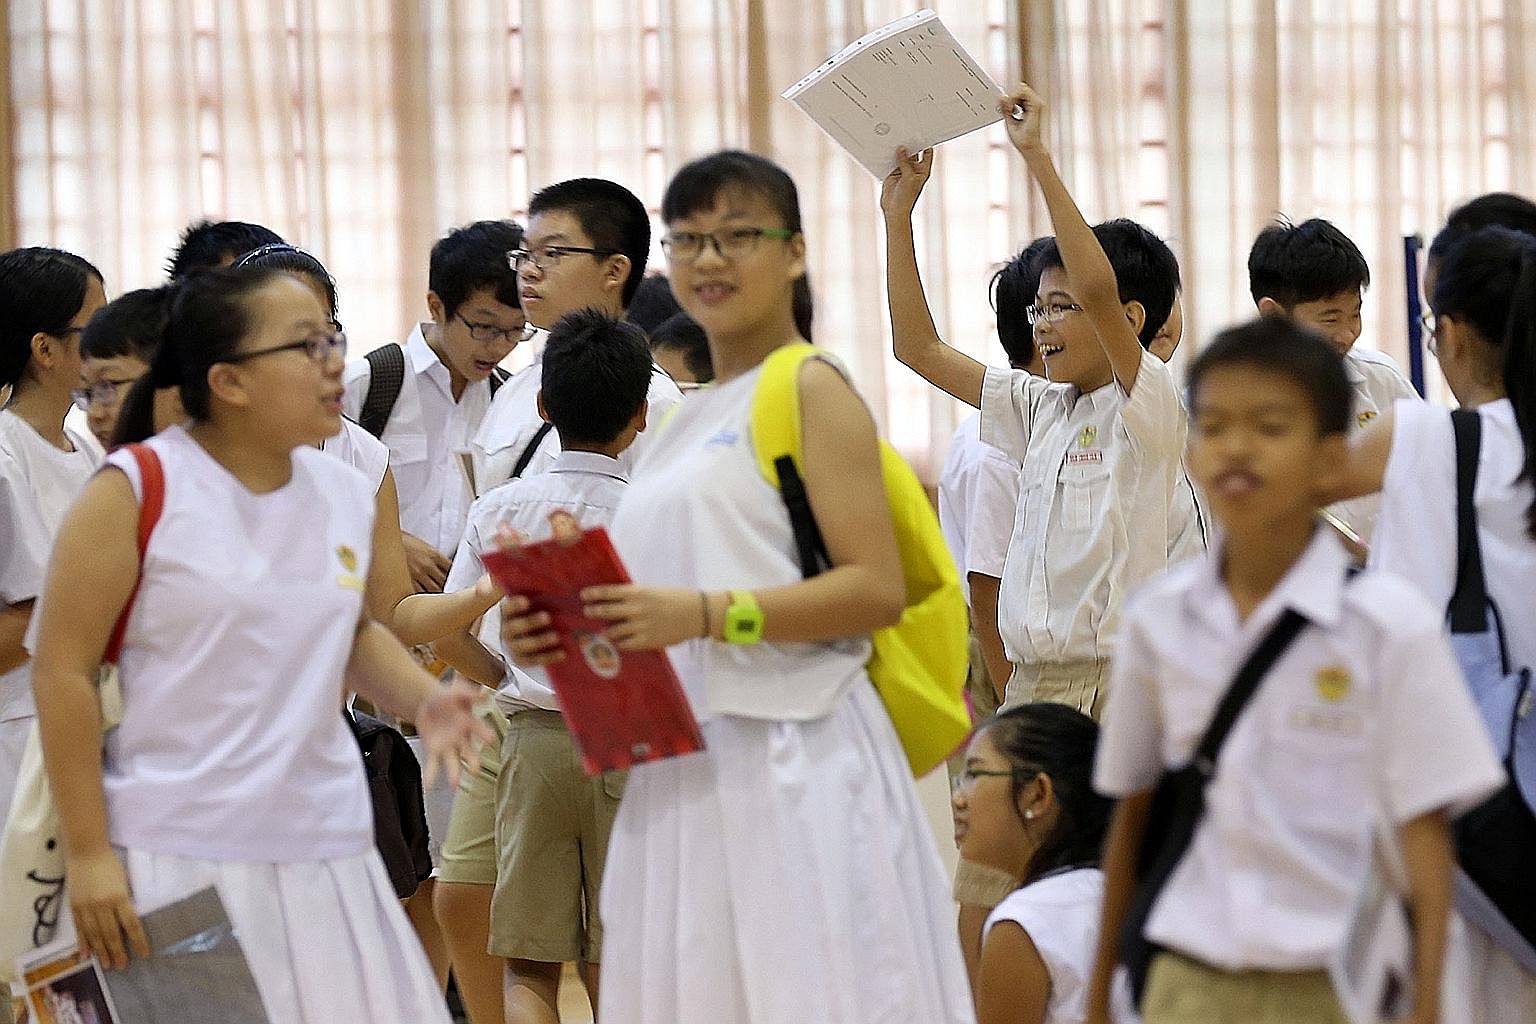 Pupils with their PSLE results. The MOE's stance on strictly adhering to cut-off points seems to go against the new direction of learning.